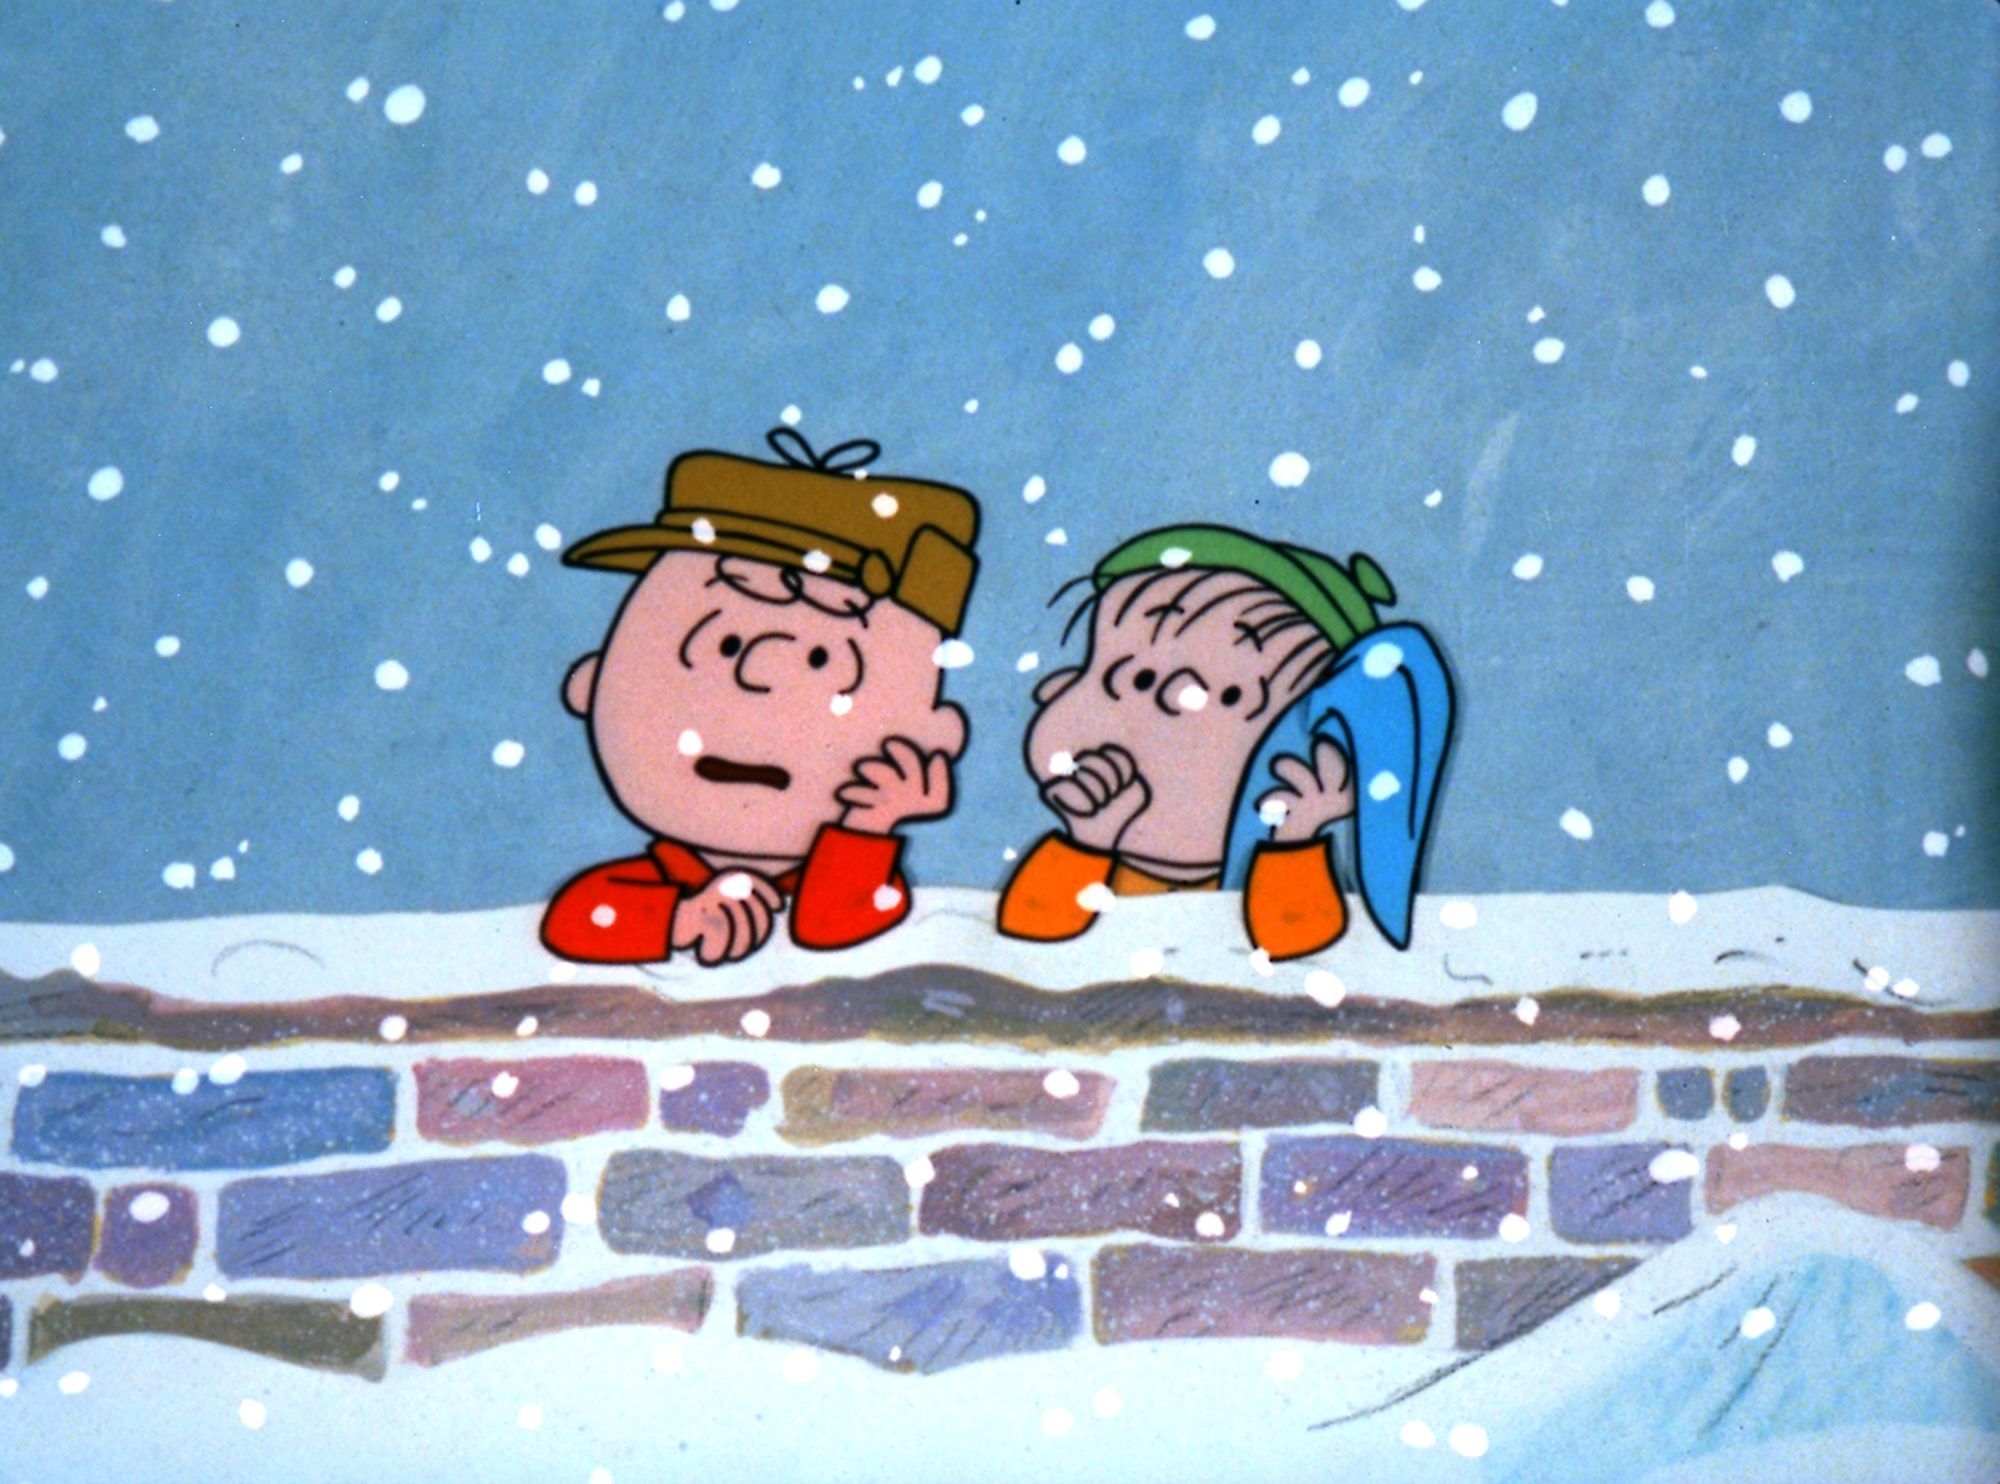 "A Charlie Brown Christmas" First Aired 54 Years Ago Today